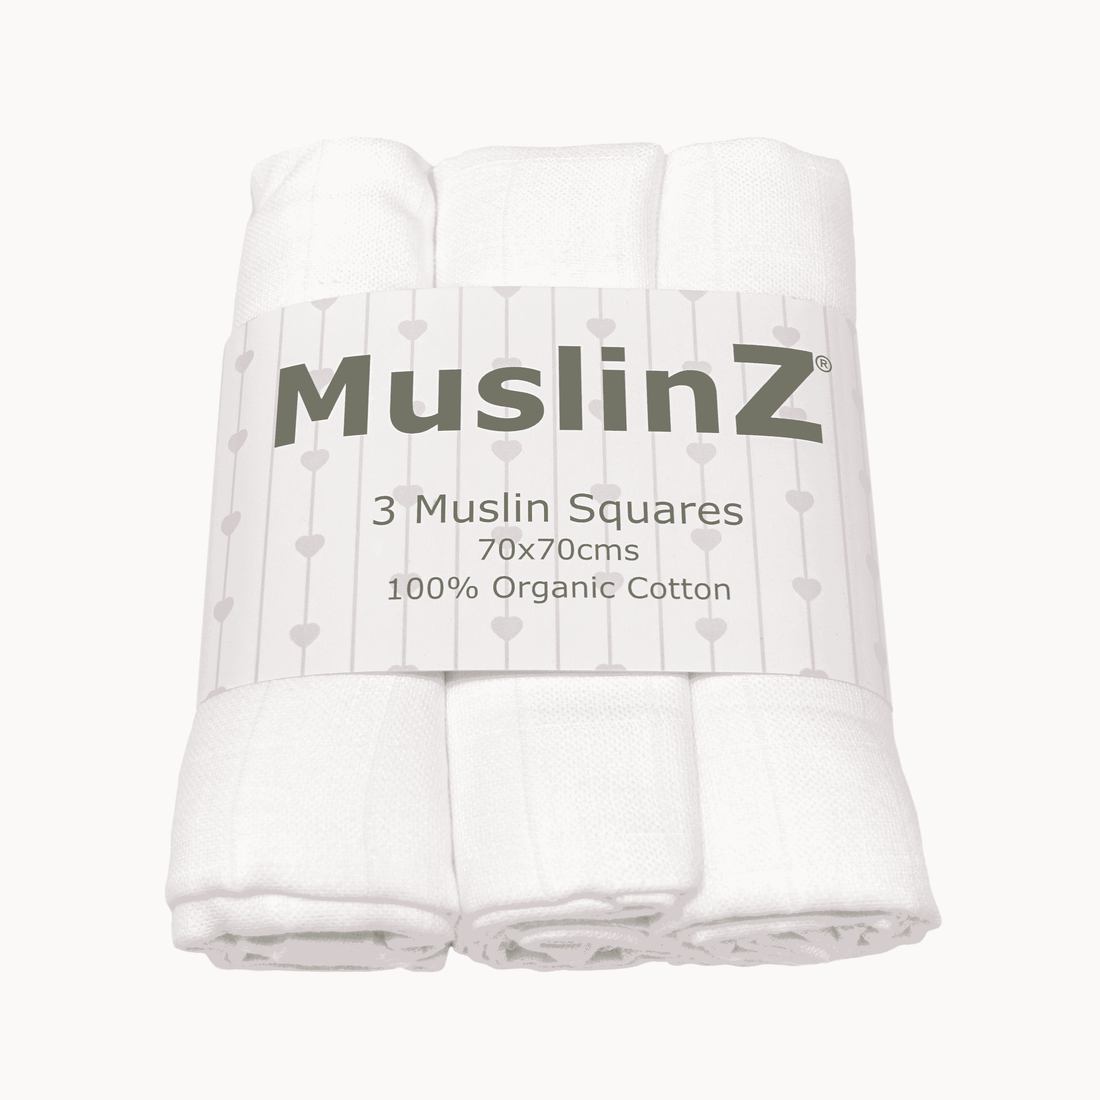 Organic Cotton Muslin Cloths-3 pack included By Muslin Z